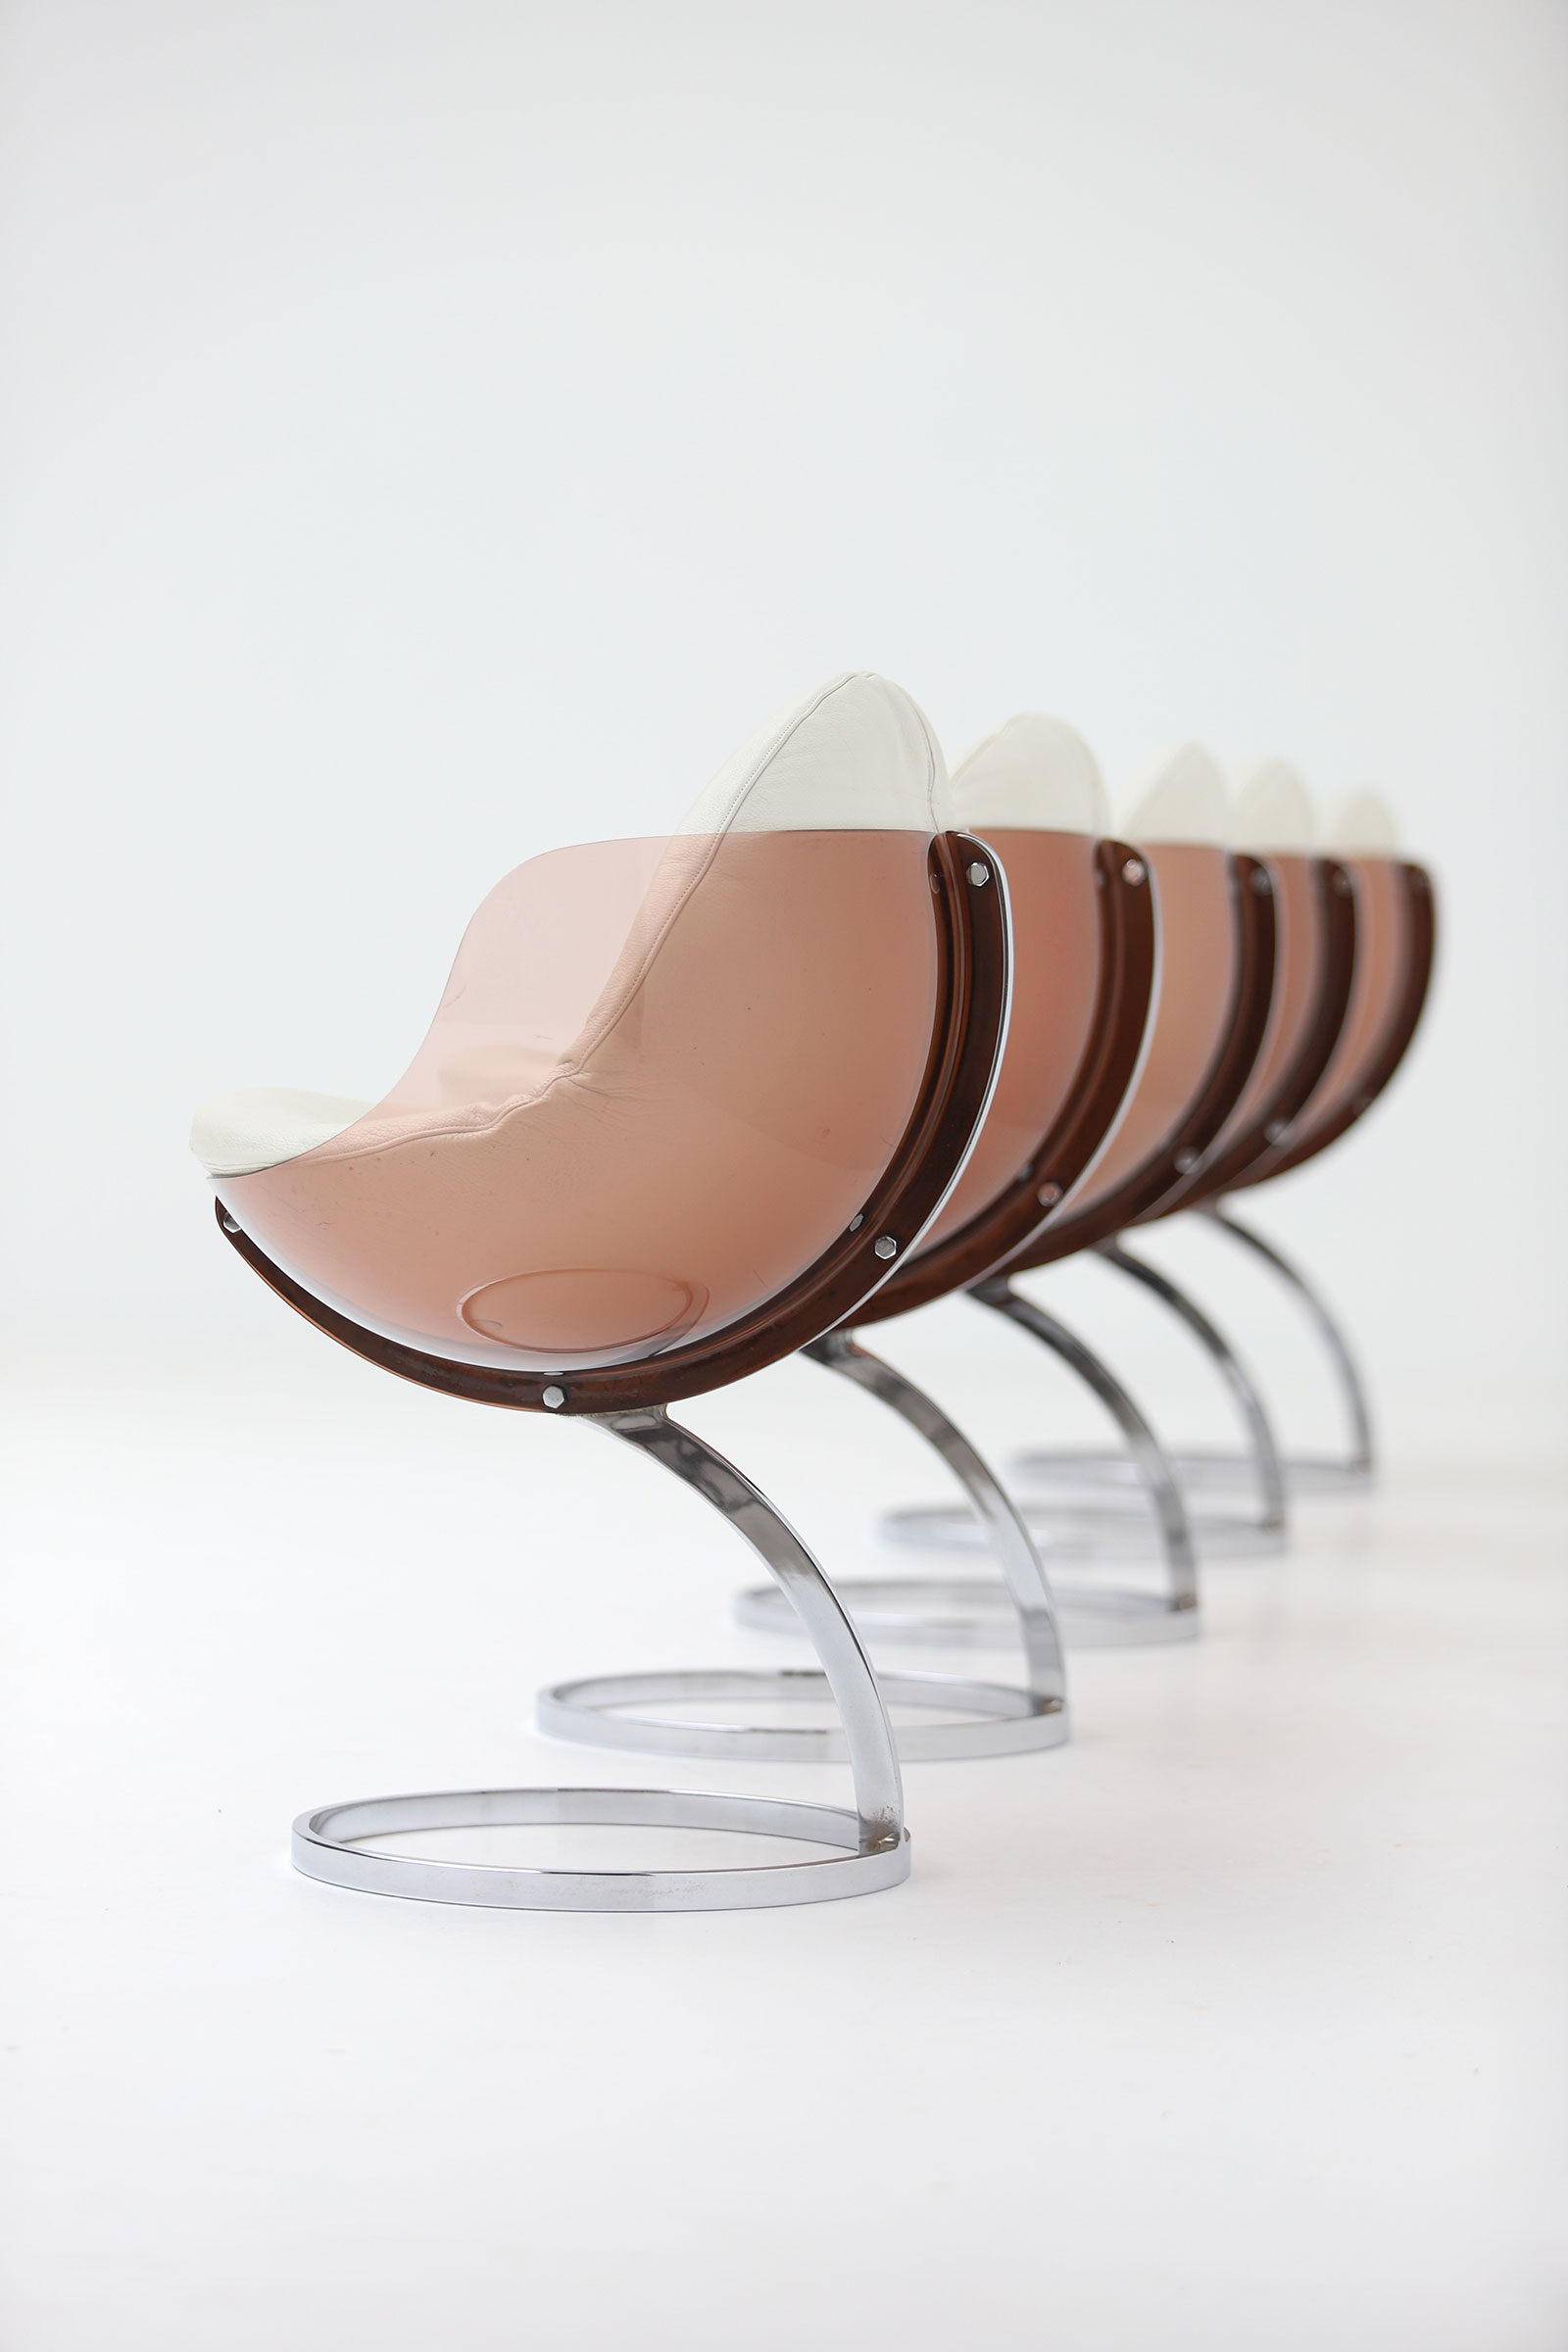 Sphere chair designed by Boris Tabacoffimage 8